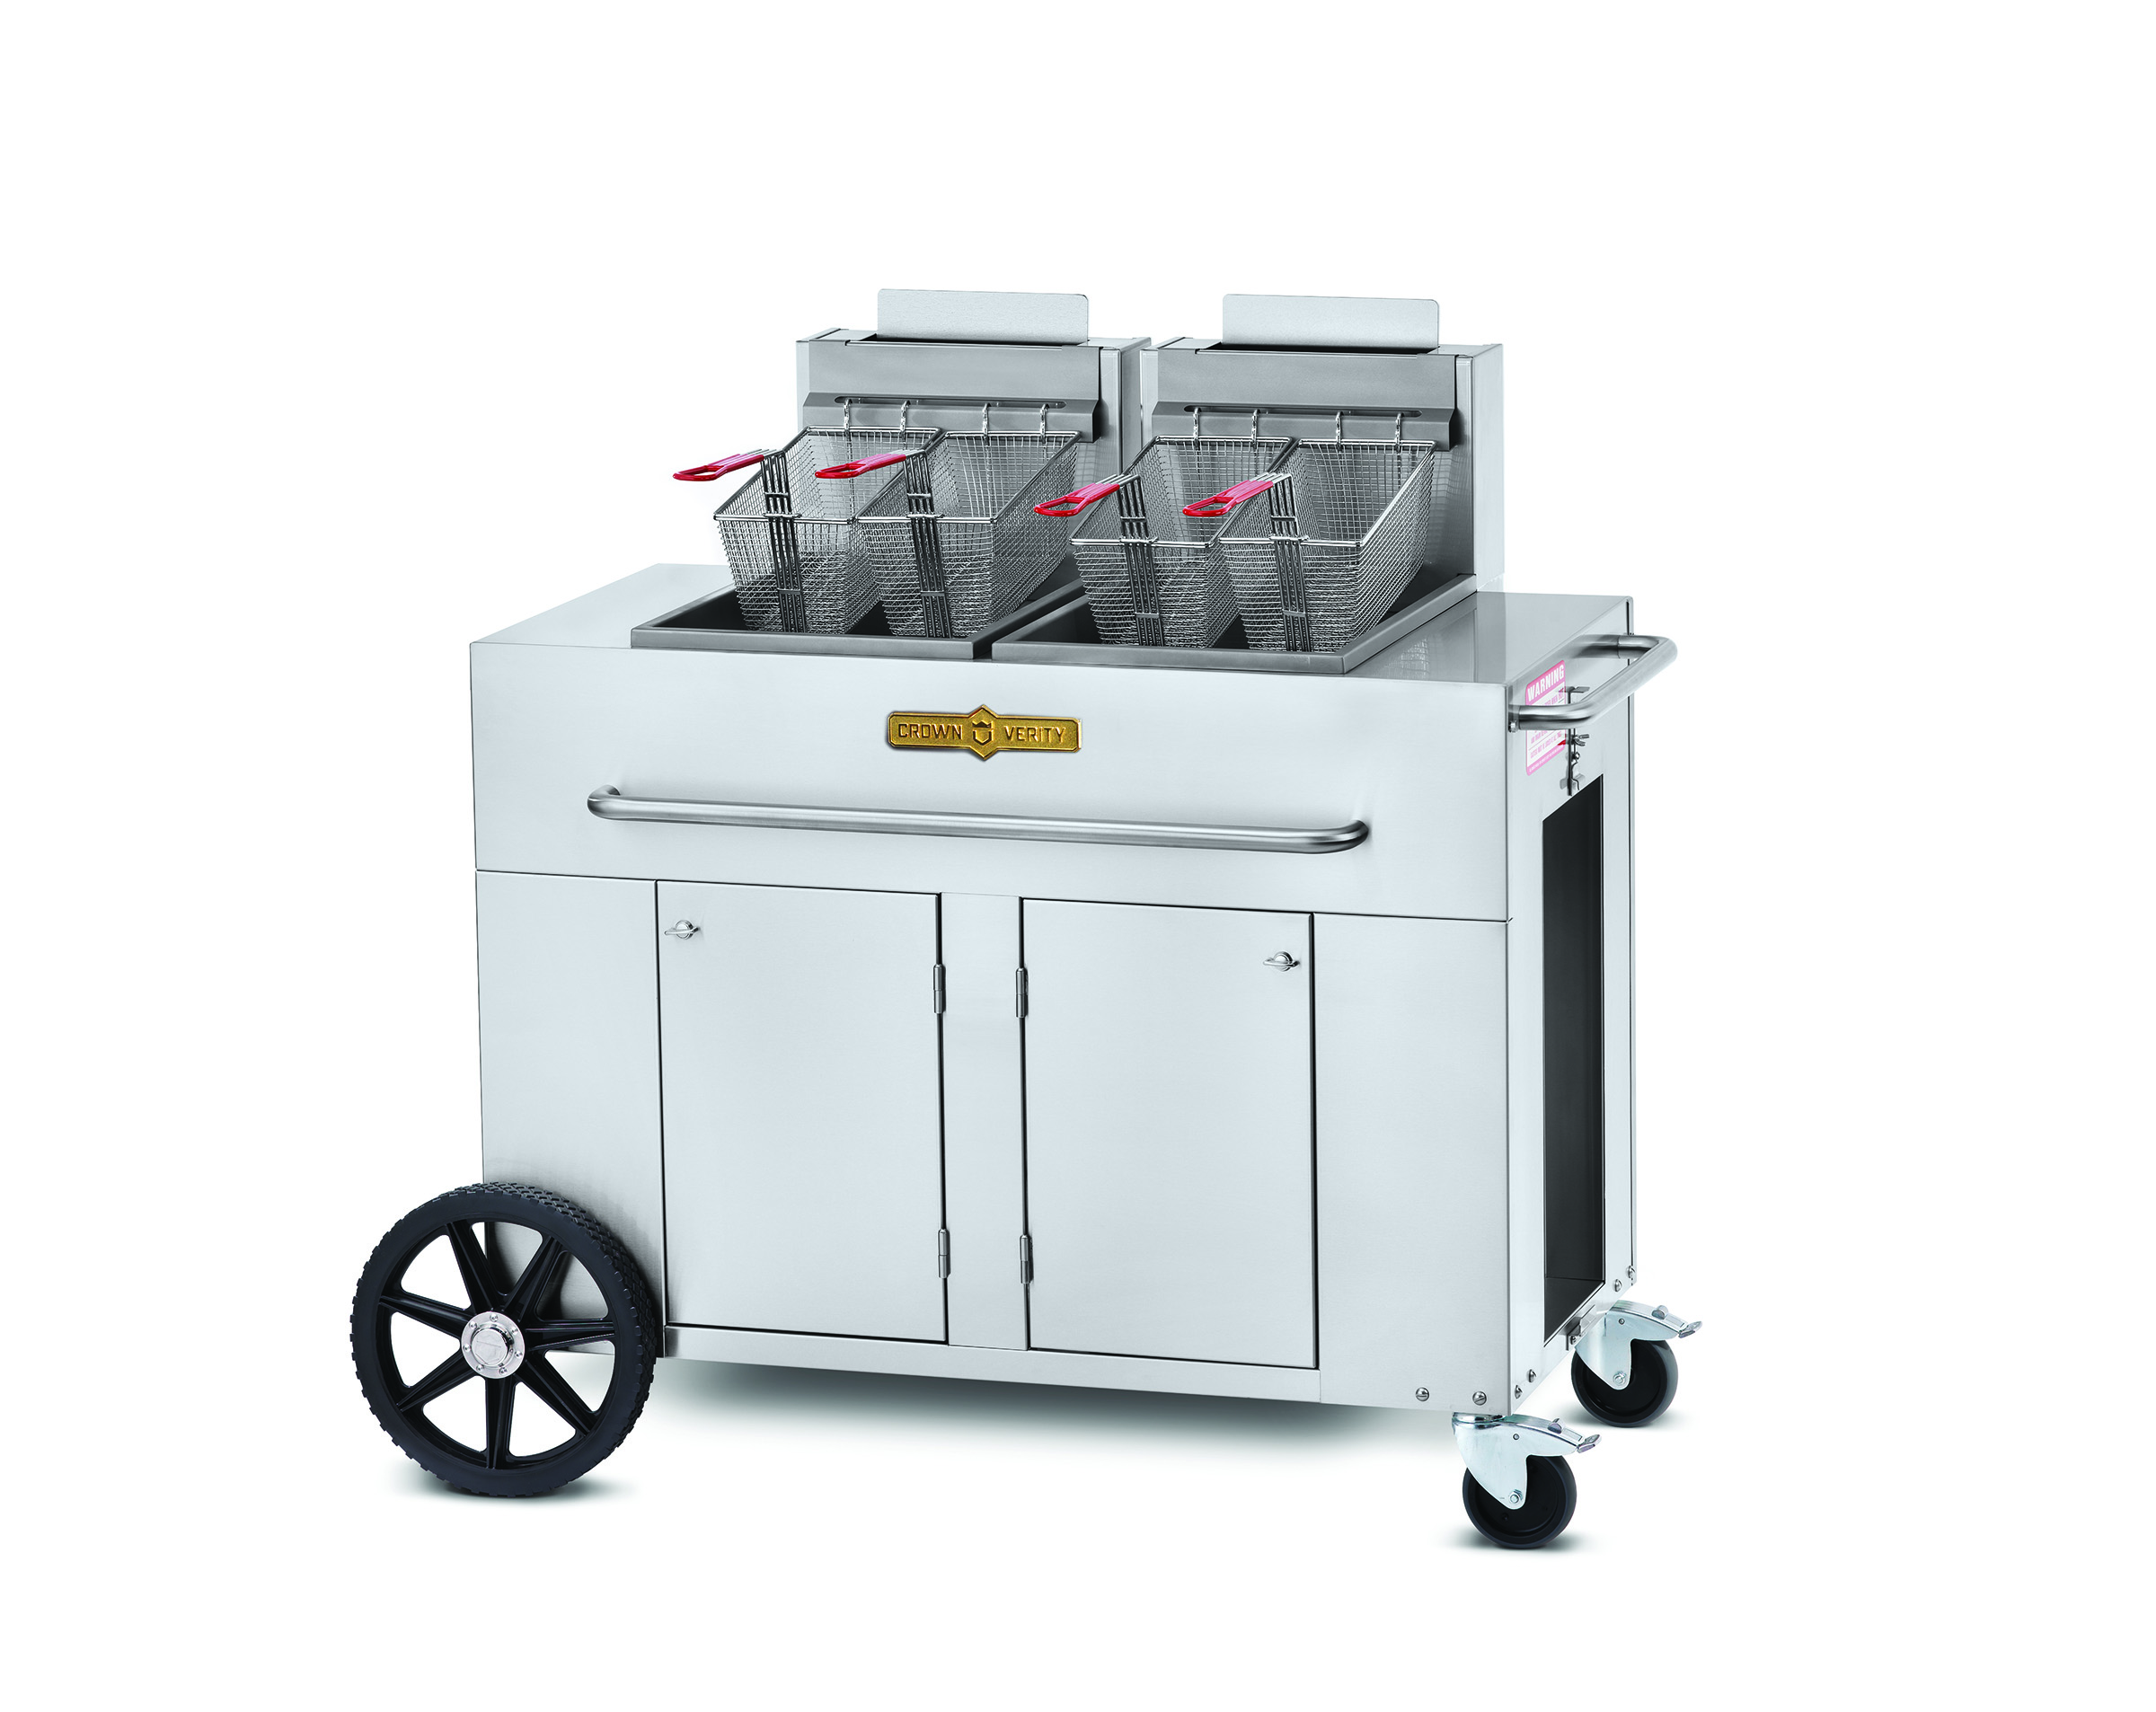 Deluxe Propane Deep Fryer 4 Basket (Requires two 30lb propane tank) - THIS ITEM IS DELIVERY ONLY.